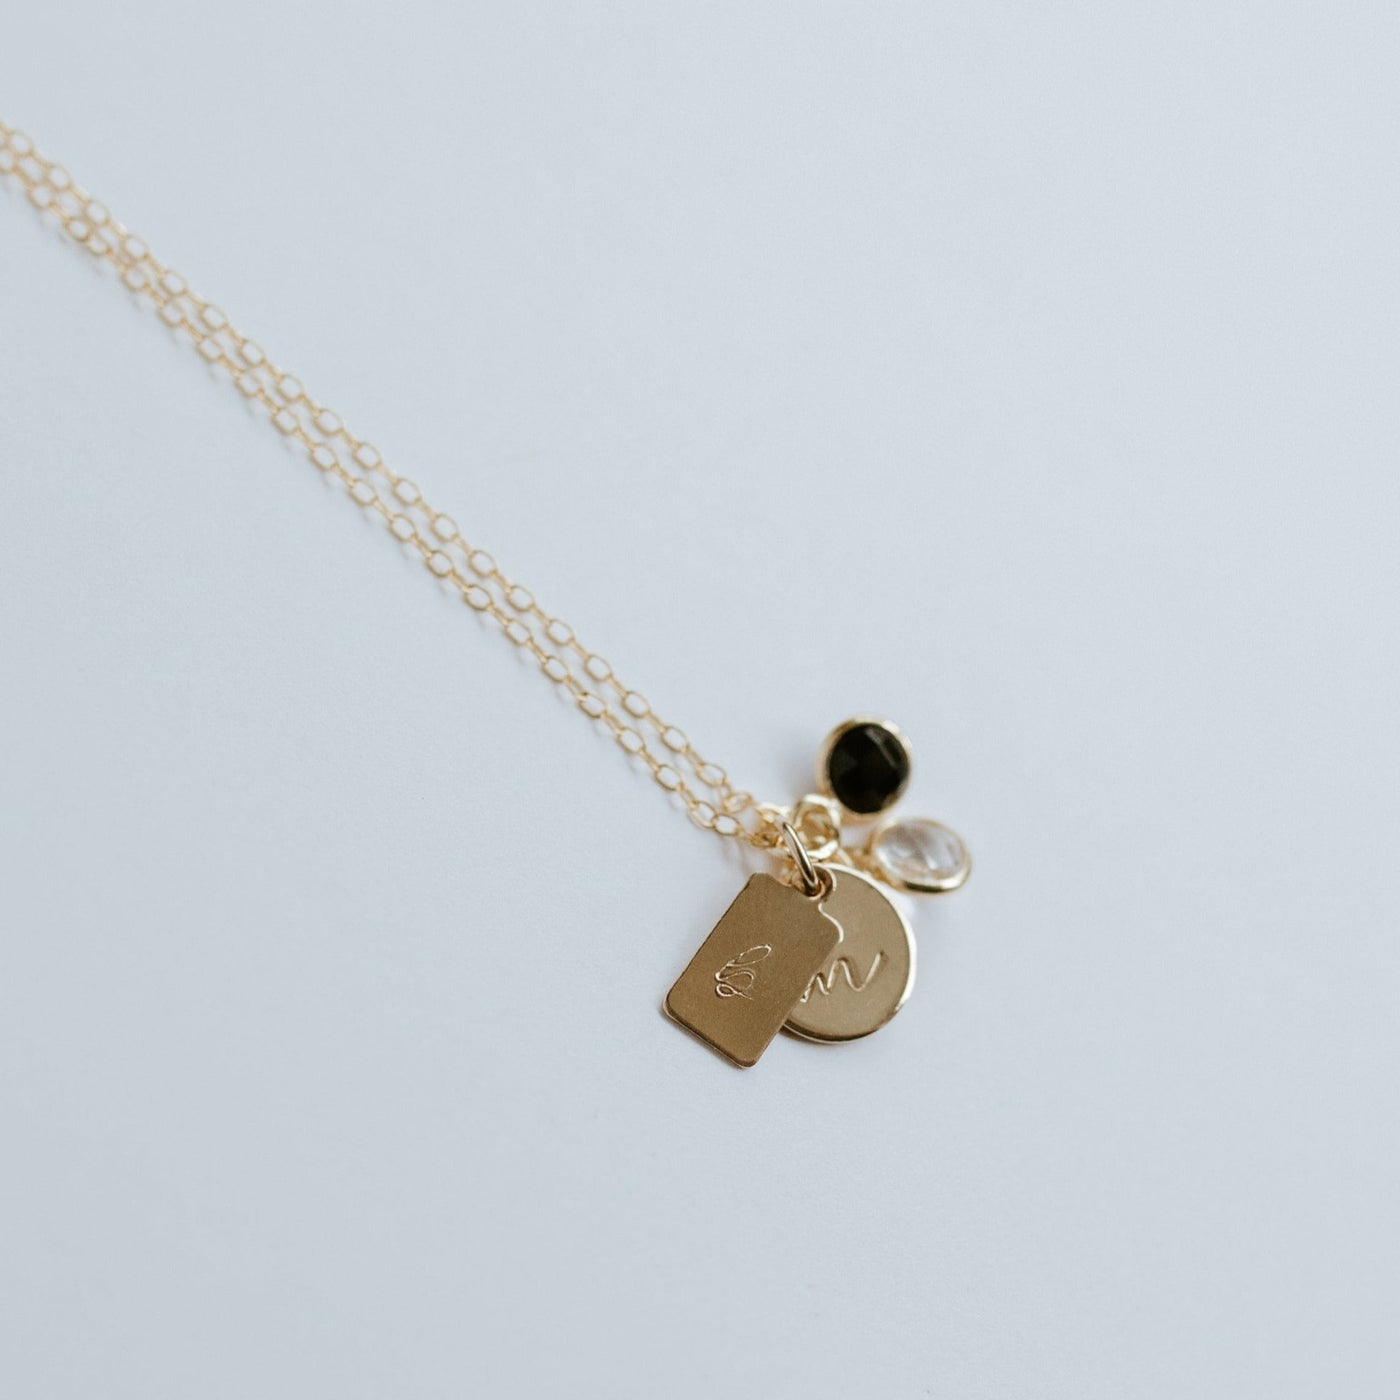 Additional Rectangle Initial Charm - Jillian Leigh Jewellery - necklaces